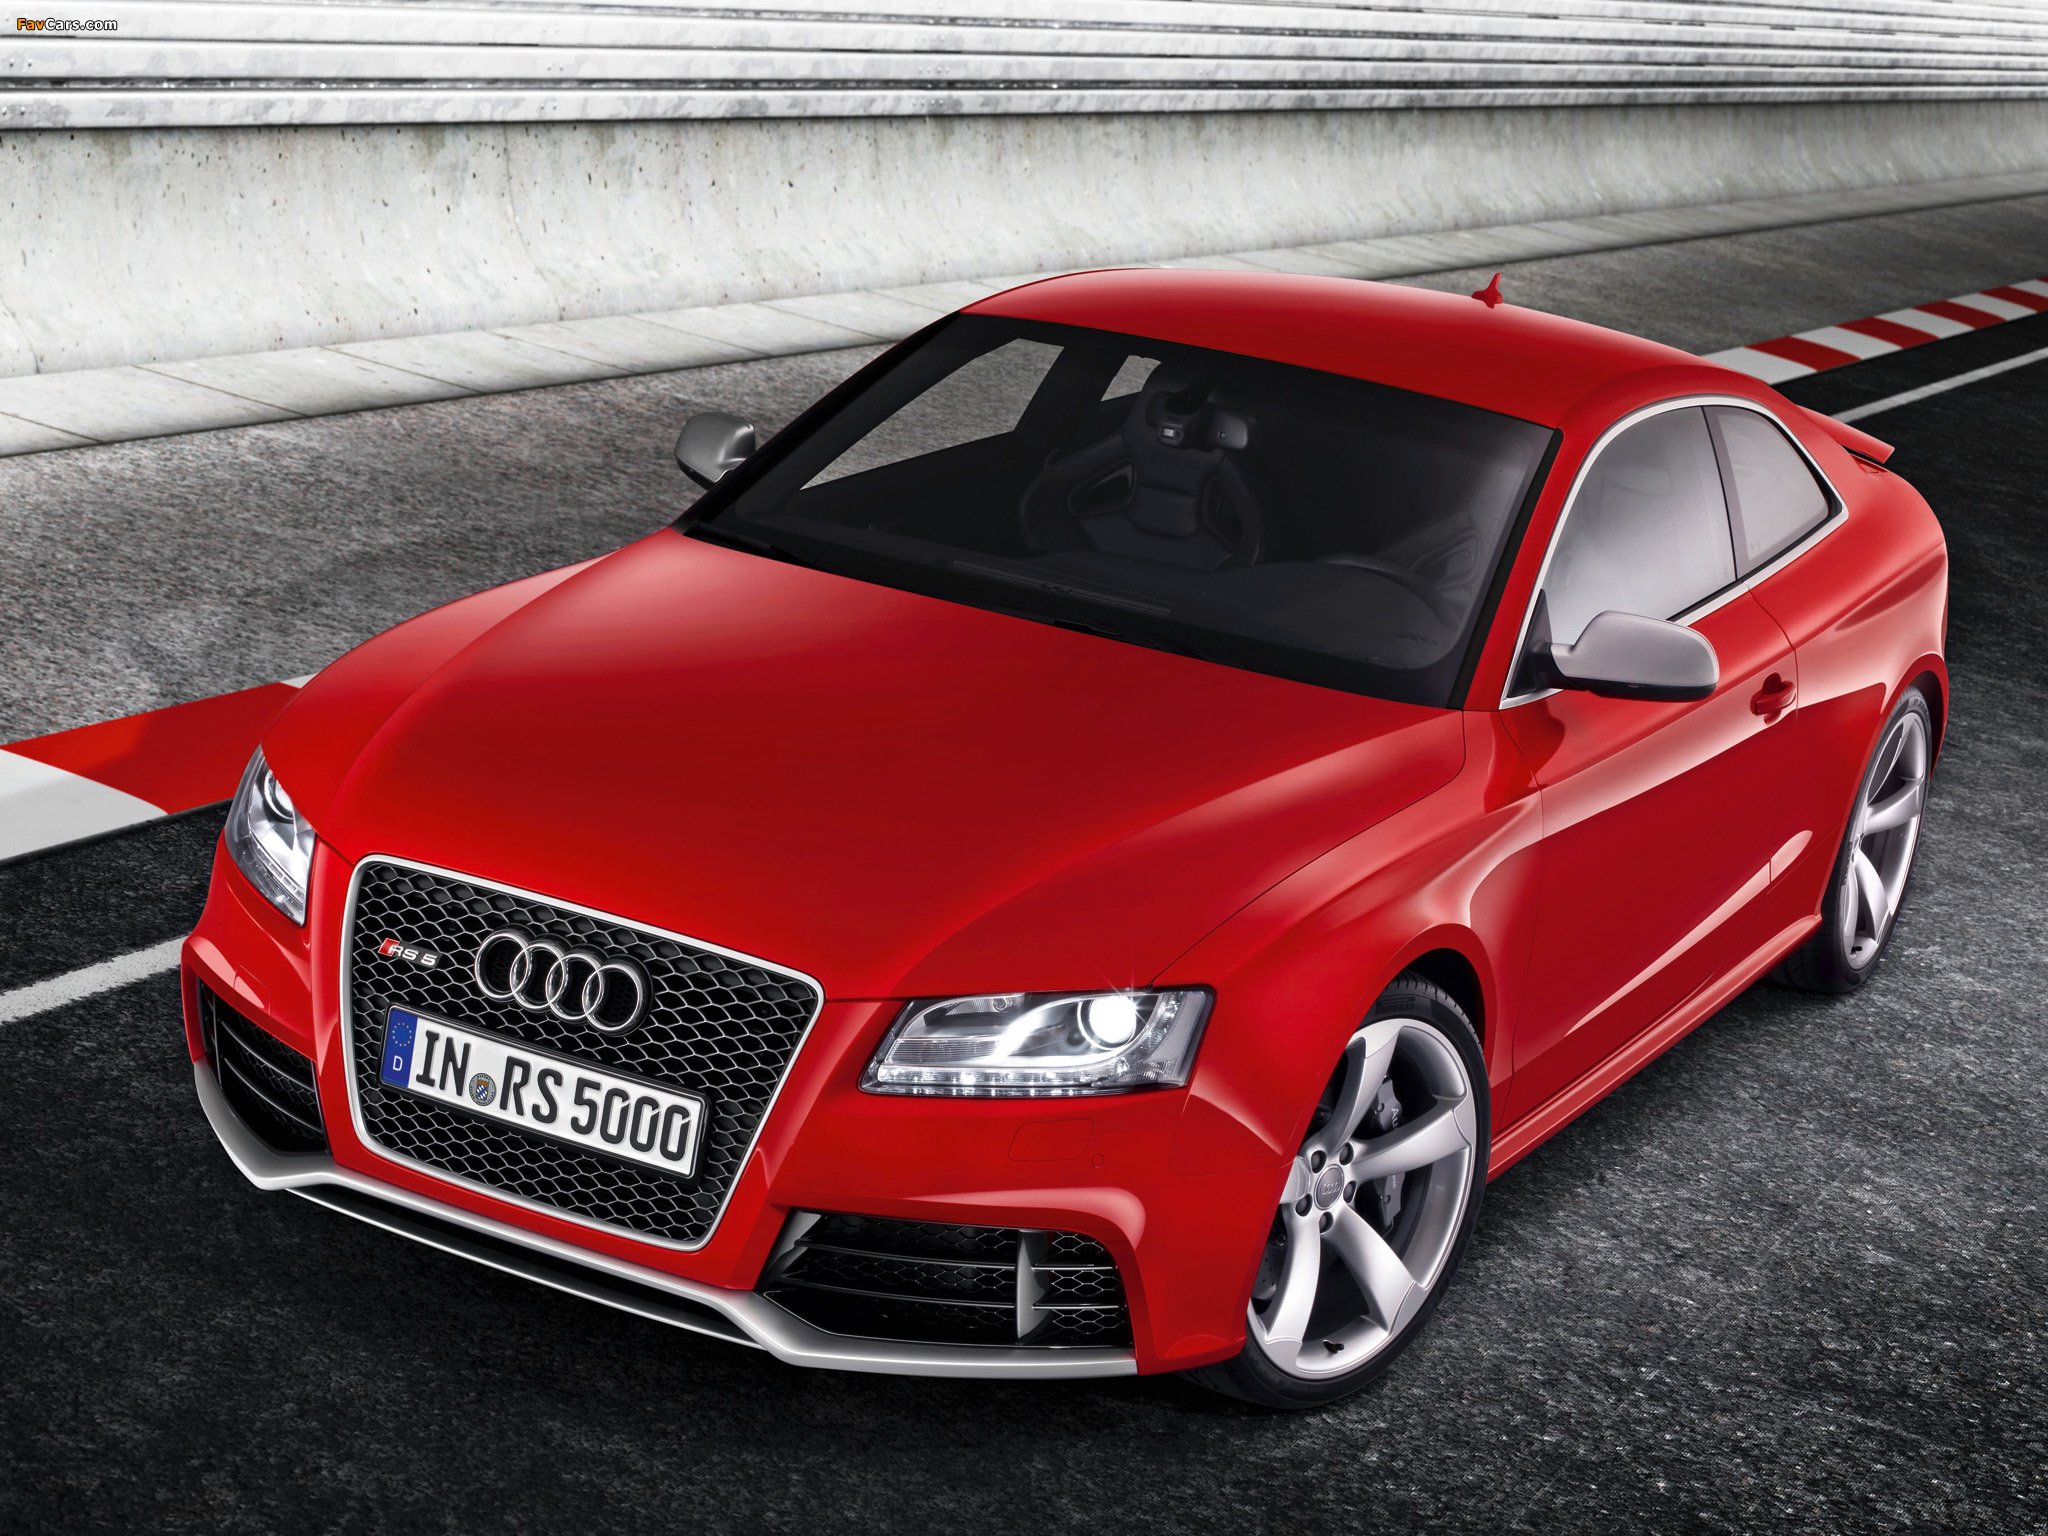 А5 н. Audi rs5 Coupe. Audi rs5 2011. Ауди rs5 Coupe 2011. Audi rs5 Coupe 2010.